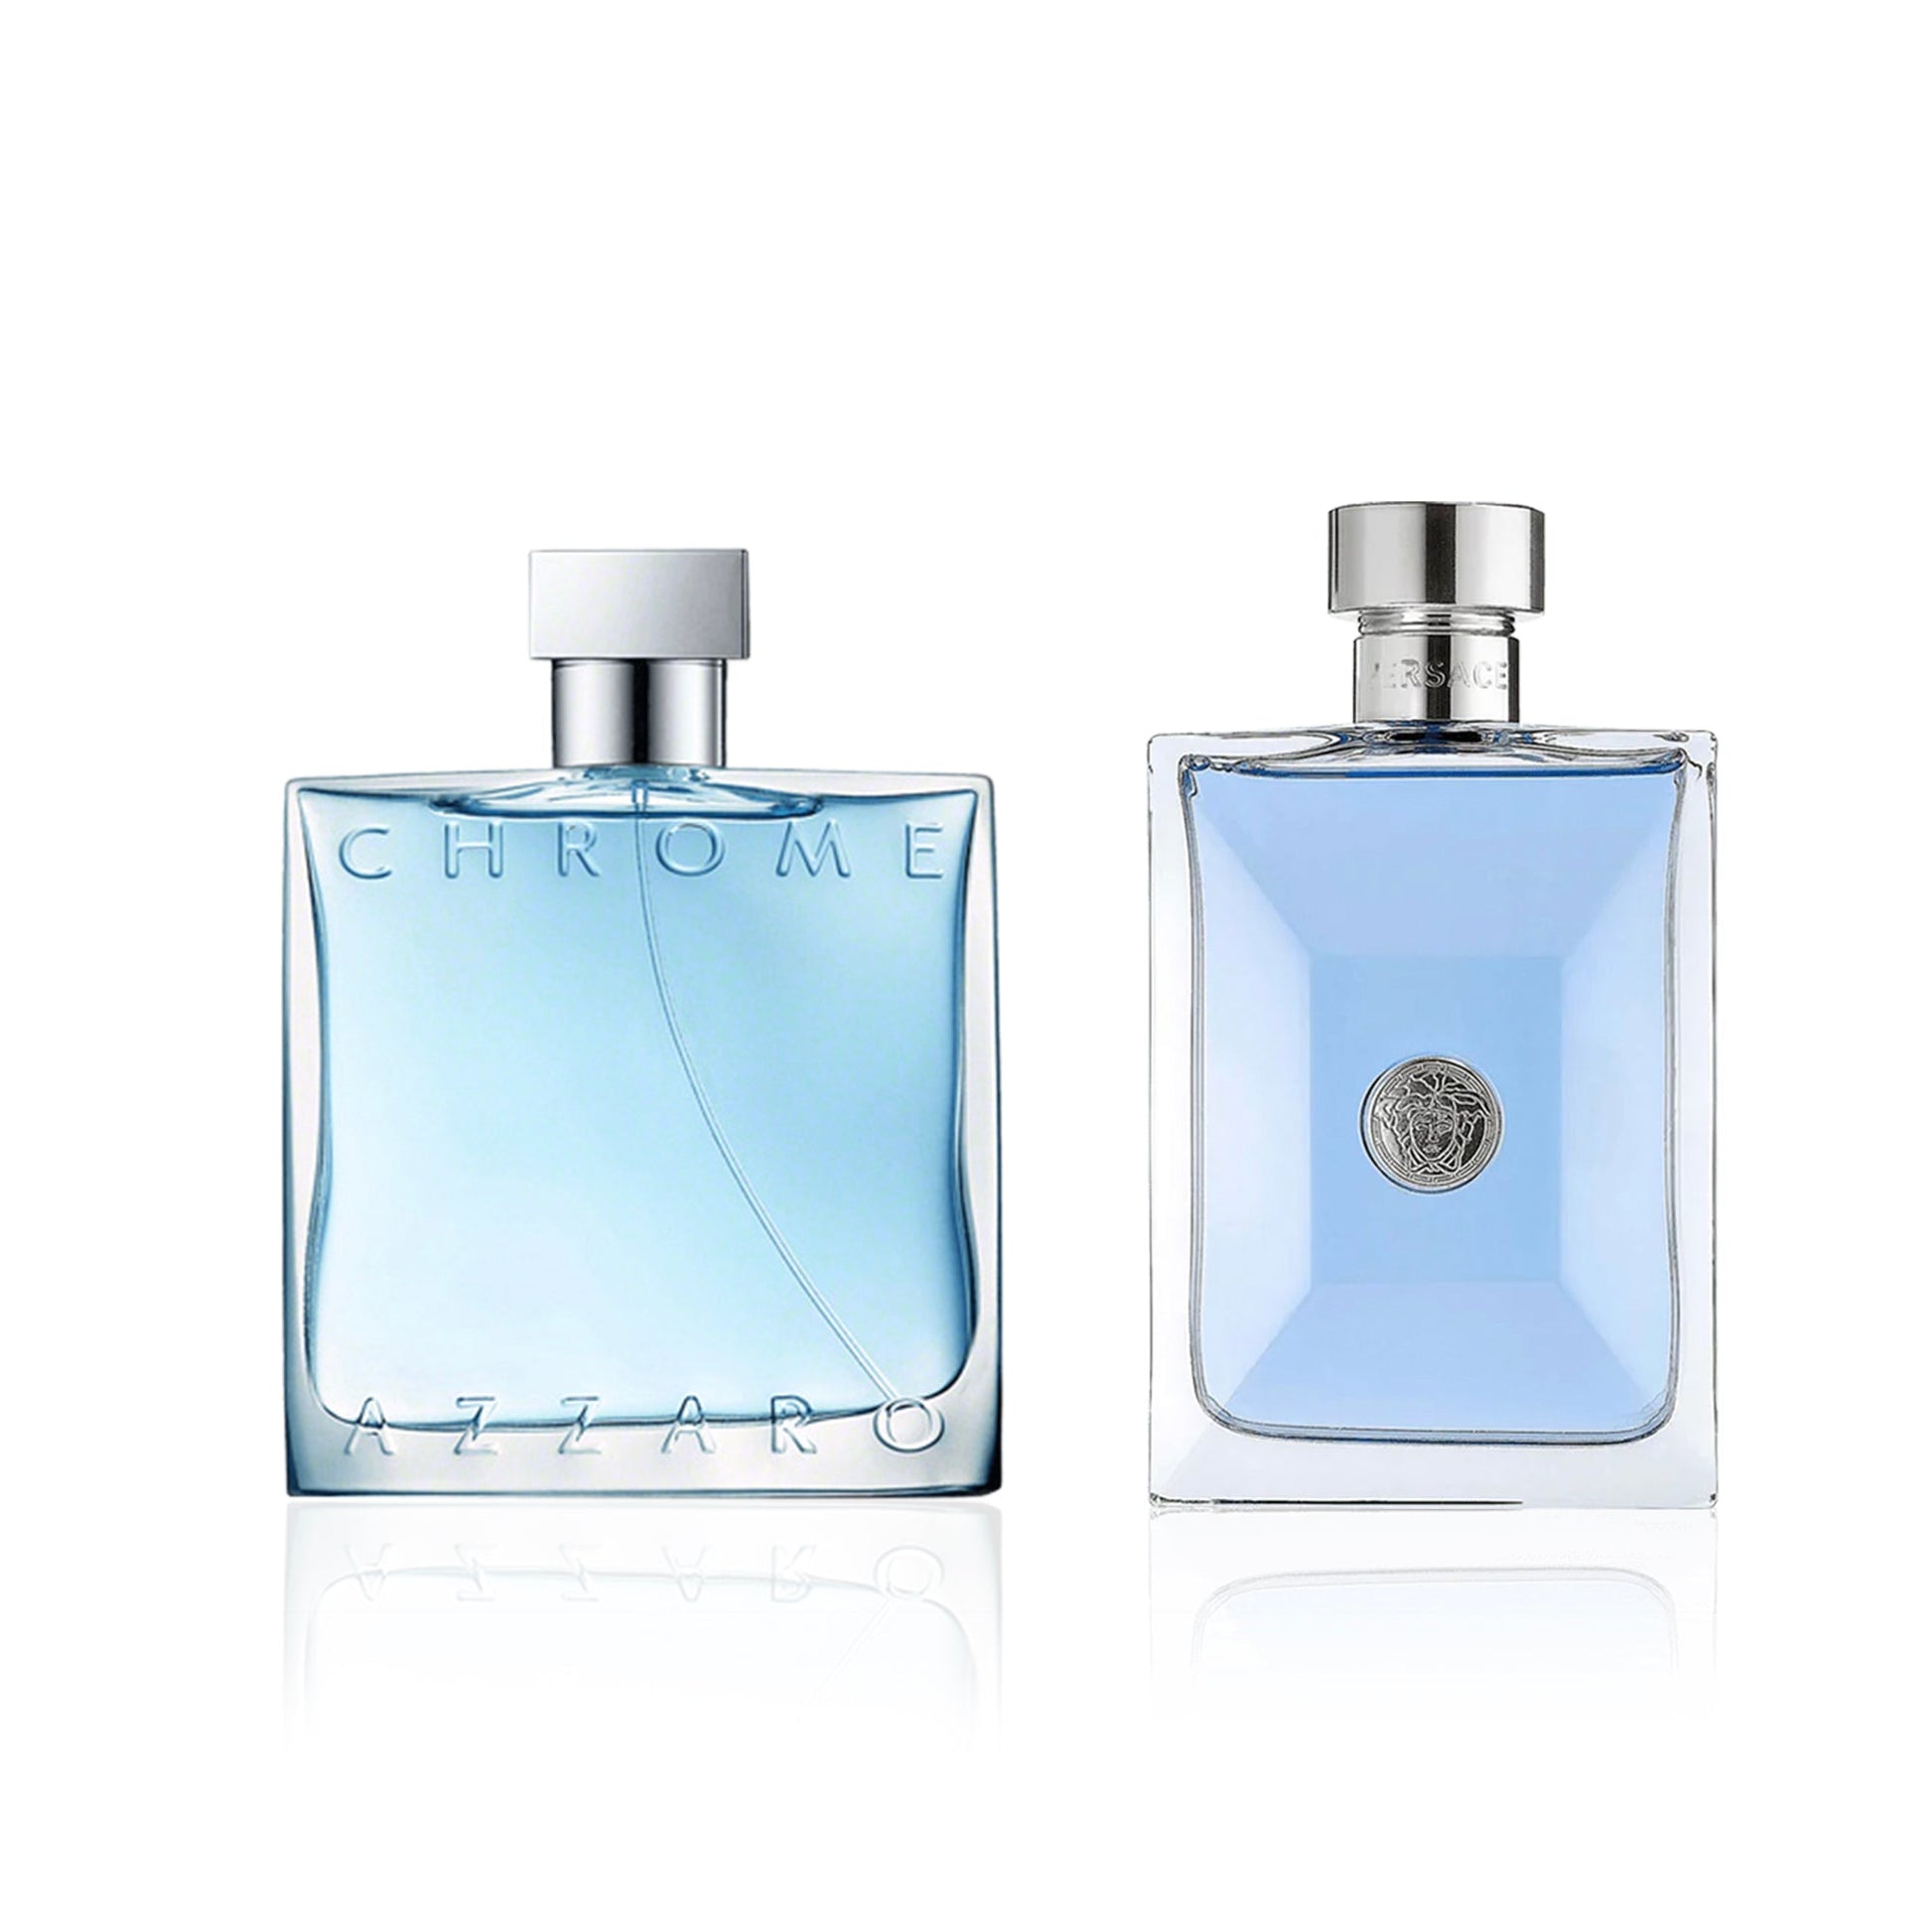 Bundle for Men: Chrome by Azzaro and Versace Pour Homme by Versace, Product image 1